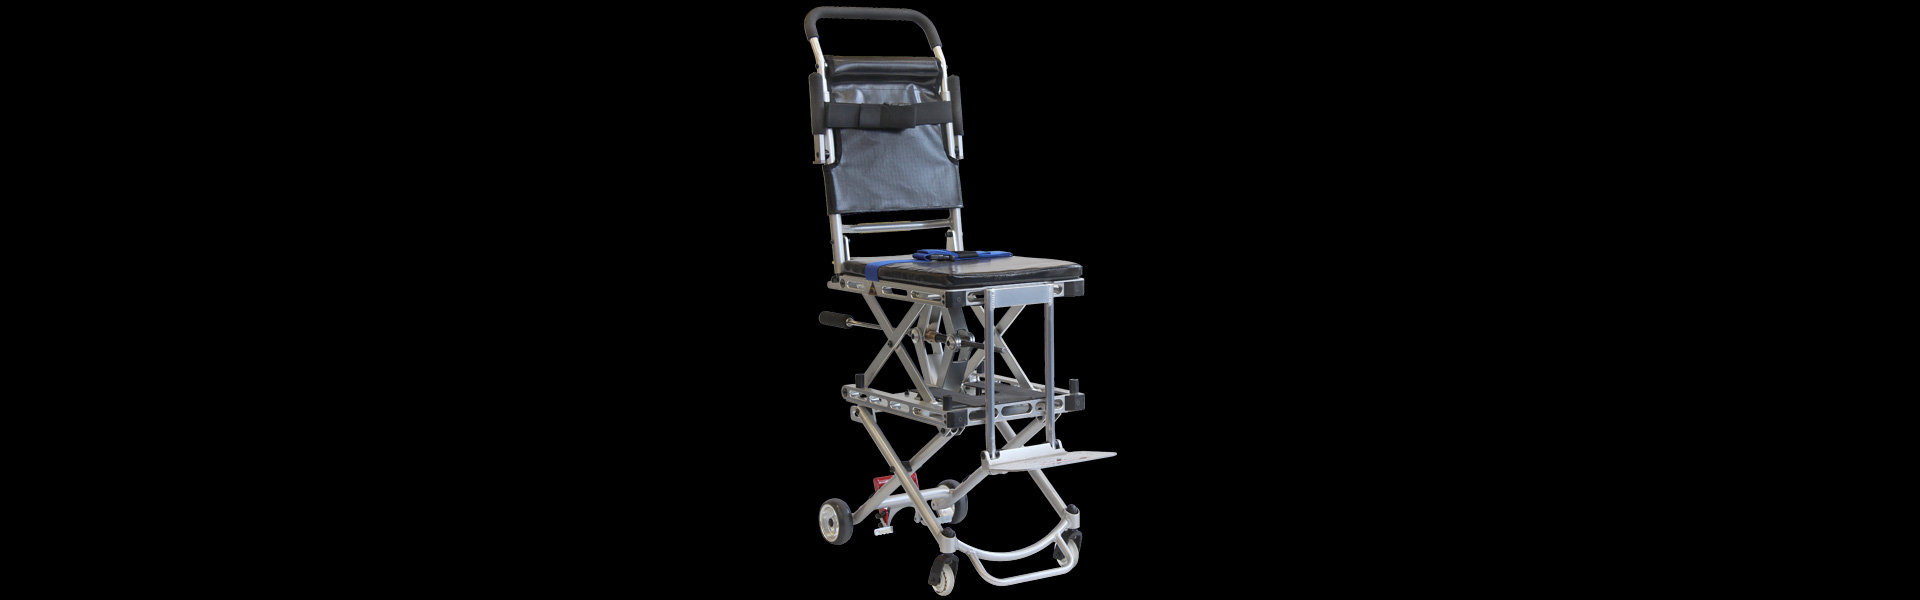 Aisle Onboard Lift Chair